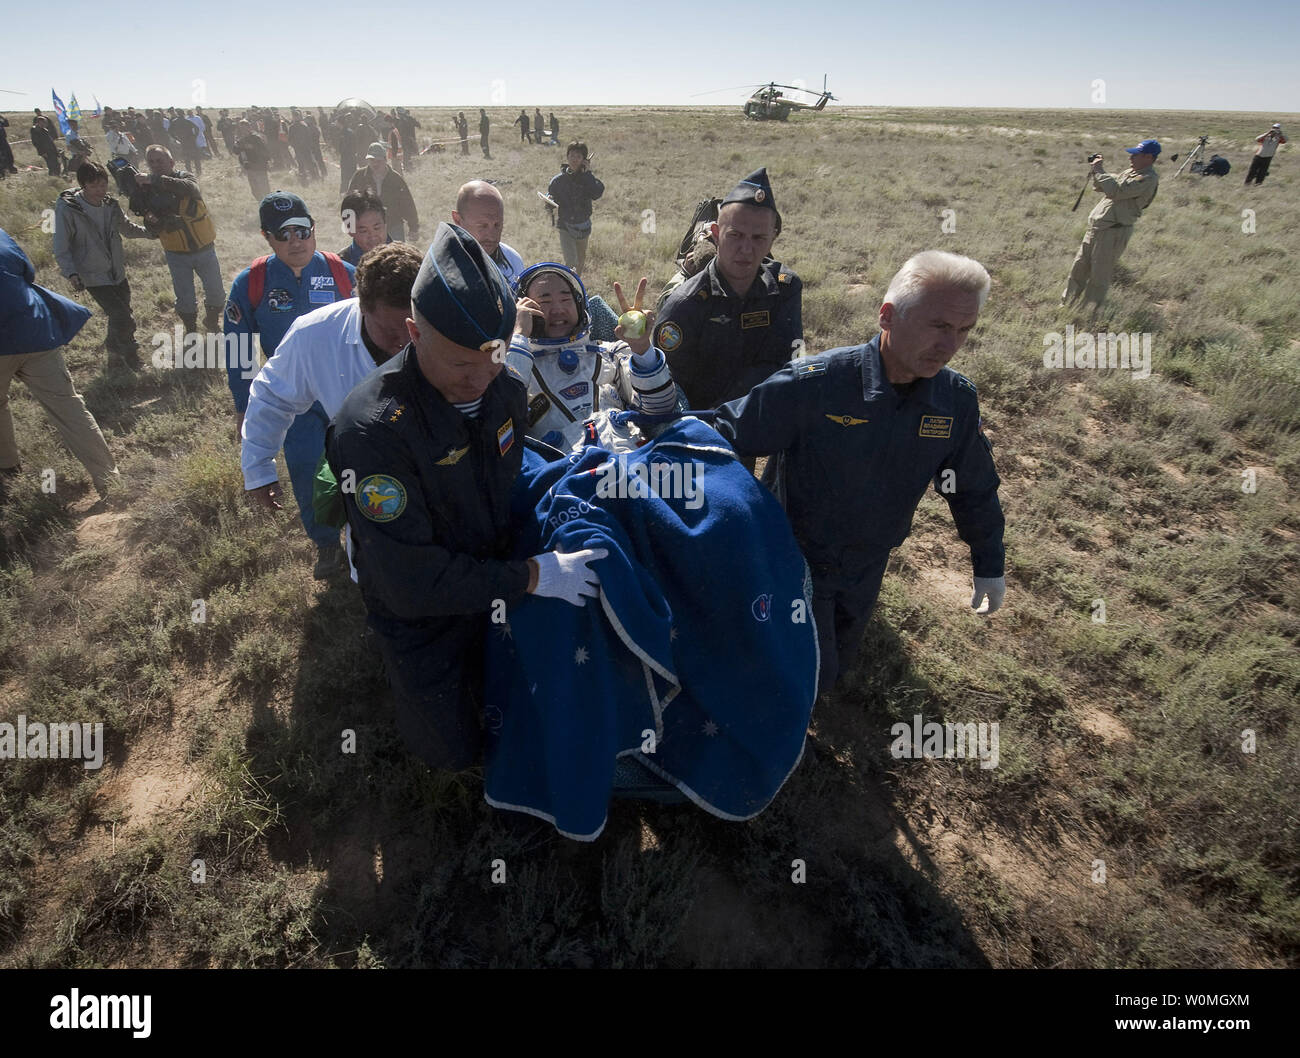 Expedition 23 Flight Engineer Soichi Noguchi is carried in a chair to the medical tent just minutes after he and fellow crew members T.J. Creamer and Commander Oleg Kotov landed in their Soyuz TMA-17 capsule near the town of Zhezkazgan, Kazakhstan on June 2, 2010. NASA Astronaut Creamer, Russian Cosmonaut Kotov and Japanese Astronaut Noguchi are returning from six months onboard the International Space Station where they served as members of the Expedition 22 and 23 crews. UPI//Bill Ingalls/NASA Stock Photo